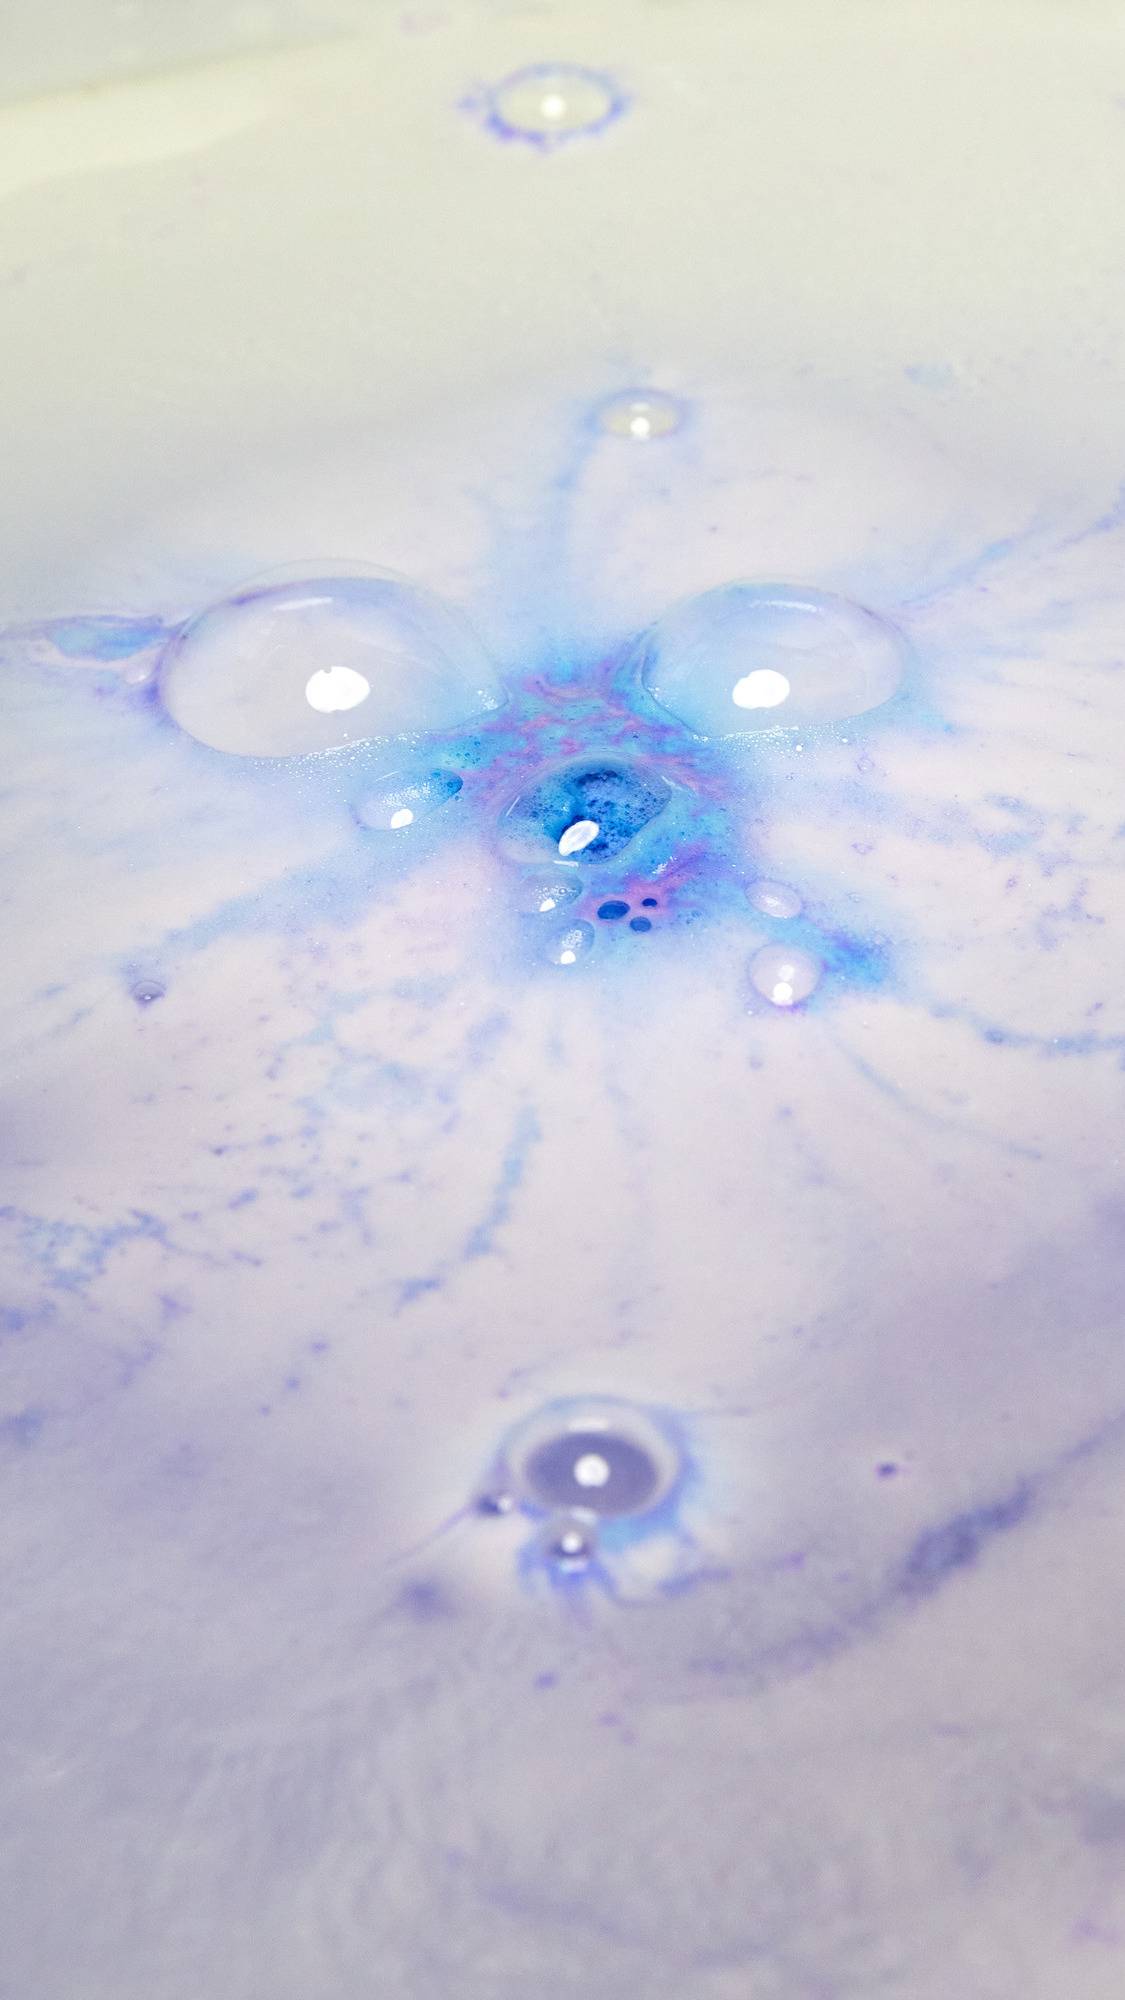 The Sleepy Bot bath bomb has completely dissolved in the water leaving behind silky, lavender-purple waters with a burst of deep purple foam in the centre.